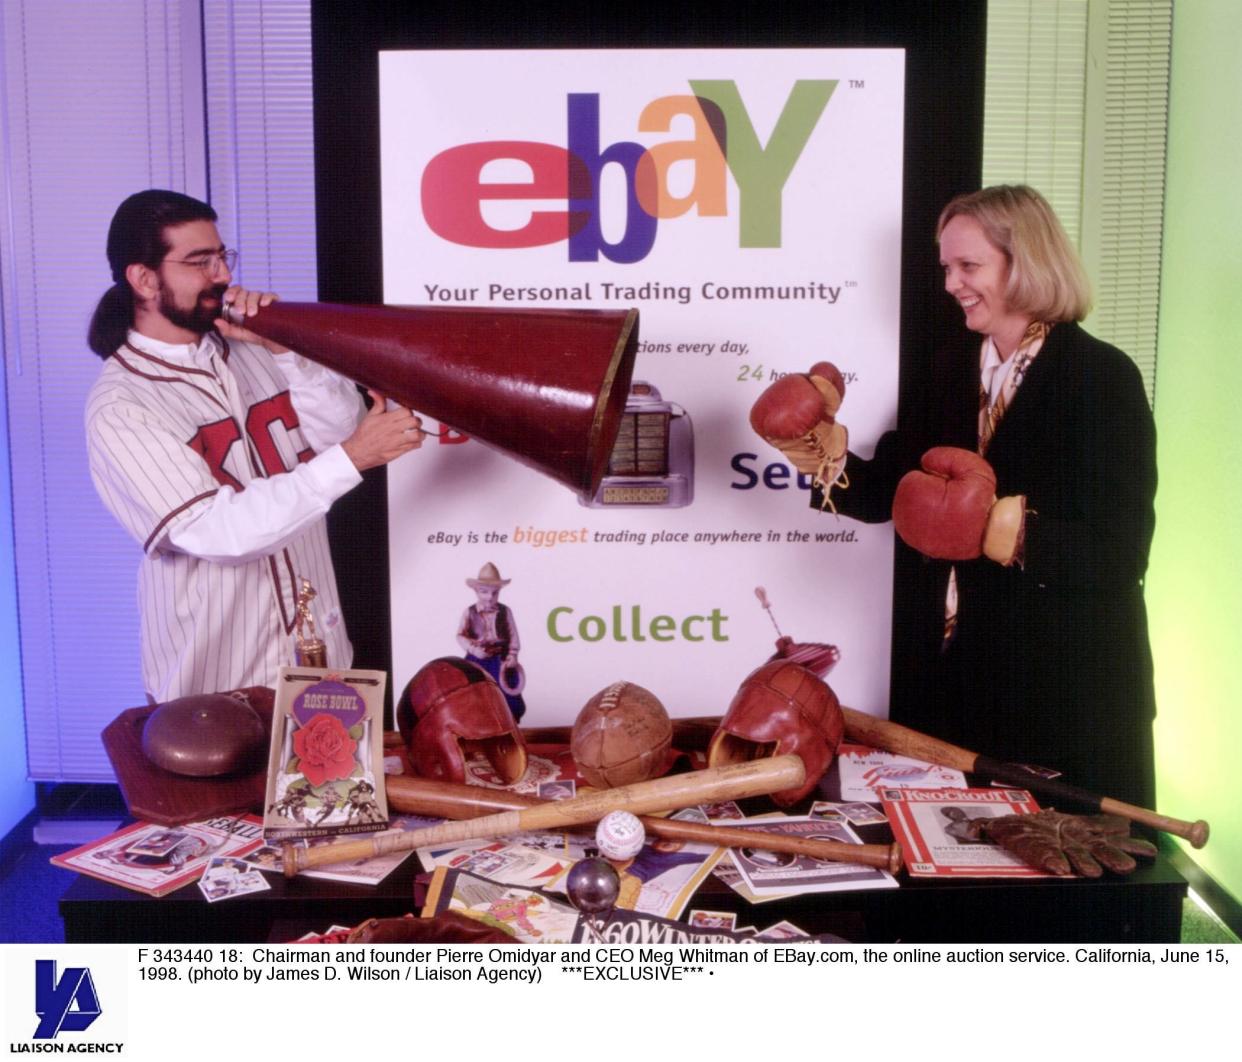 Chairman and founder Pierre Omidyar and CEO Meg Whitman of EBay.com, the online auction service. California, June 15, 1998.